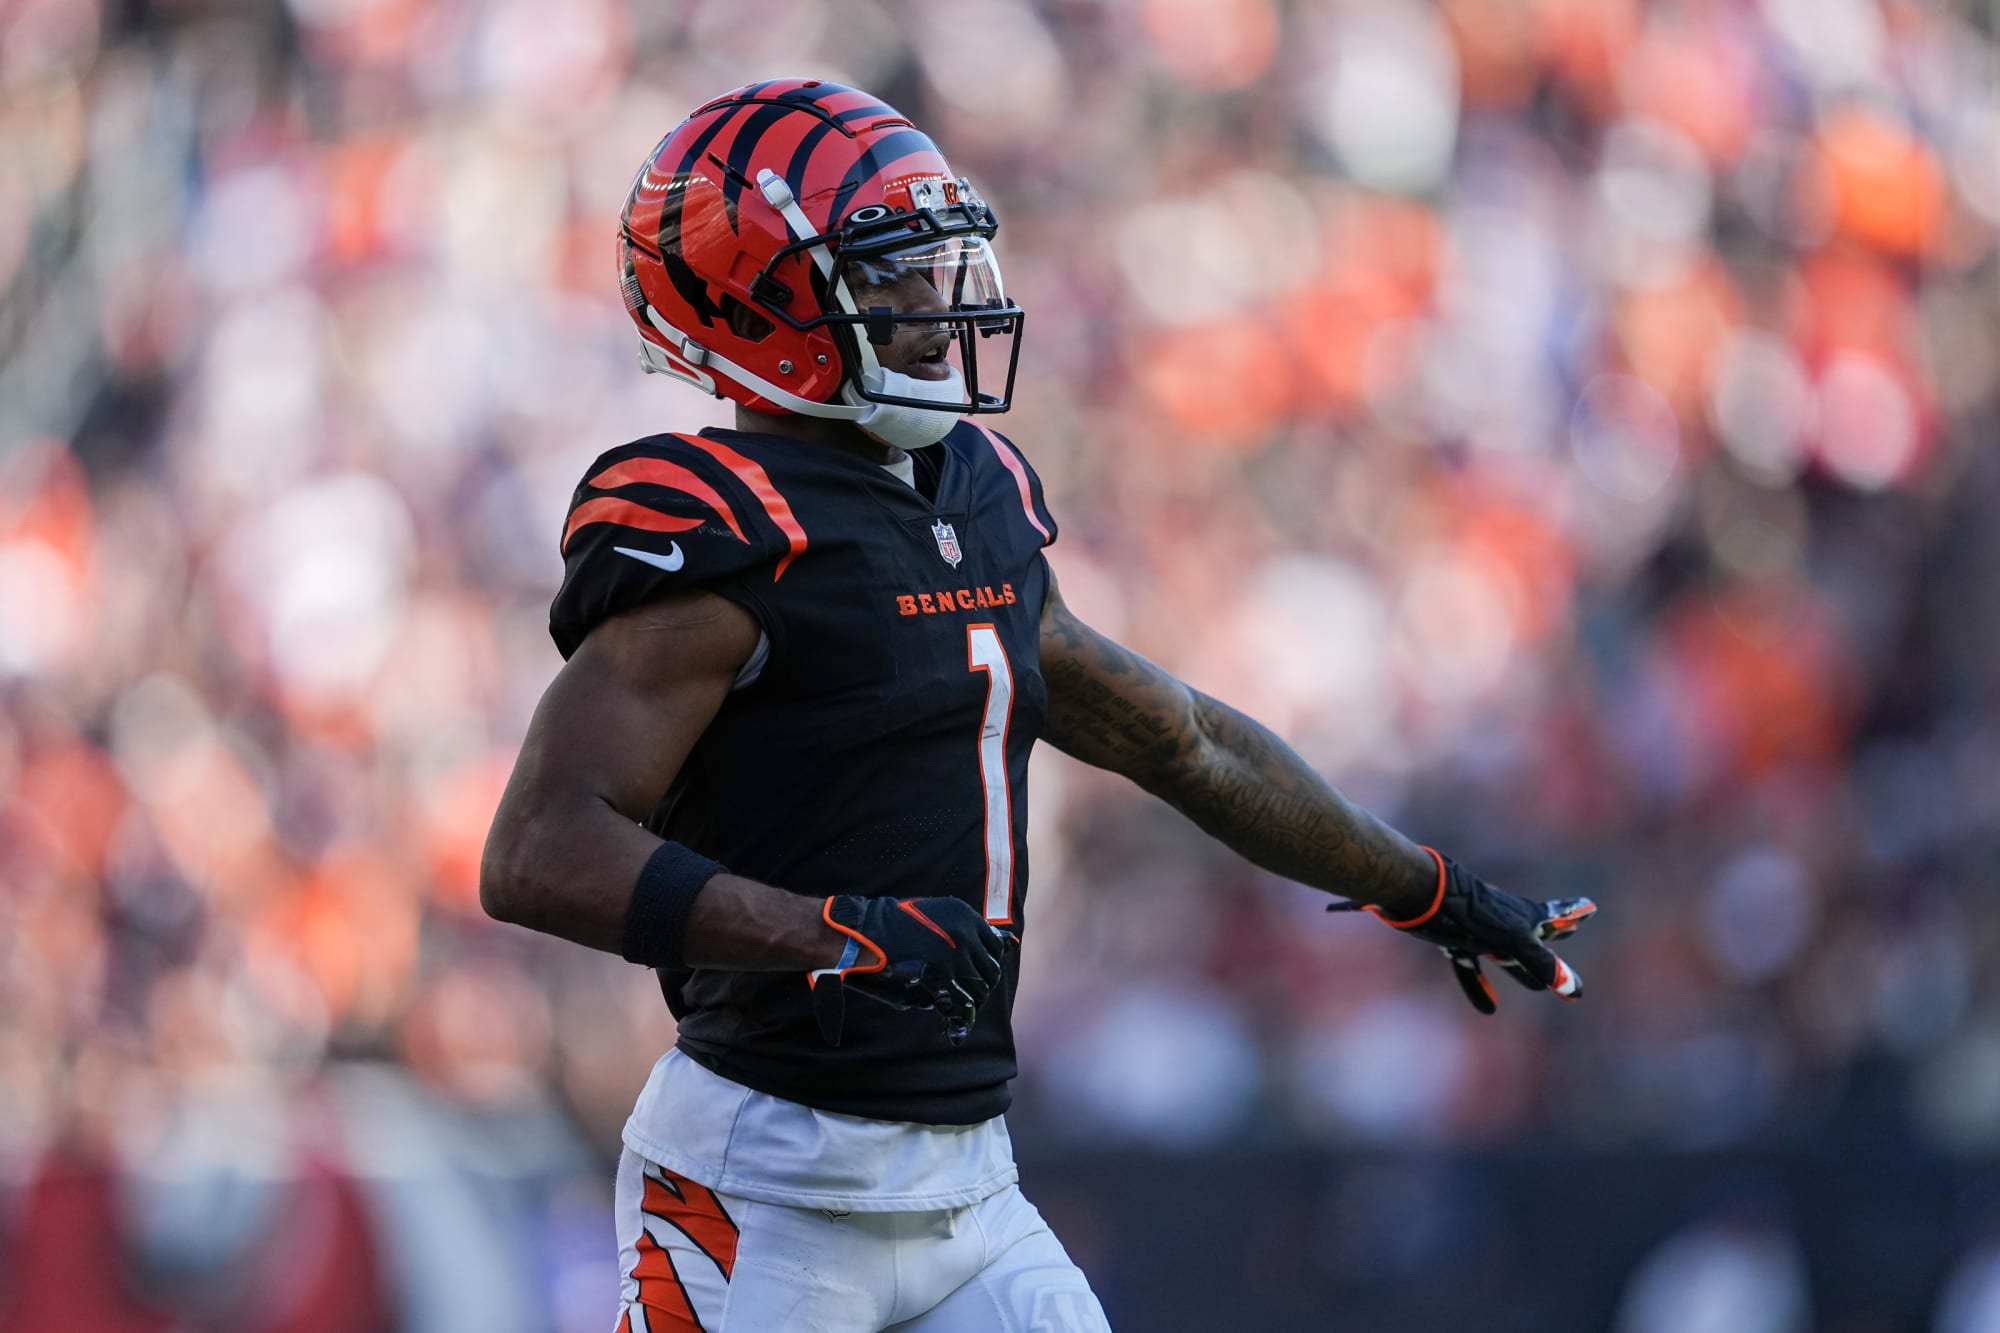 5 fantasy football waiver wire replacemens for Bengals wide receiver Ja’Marr Chase